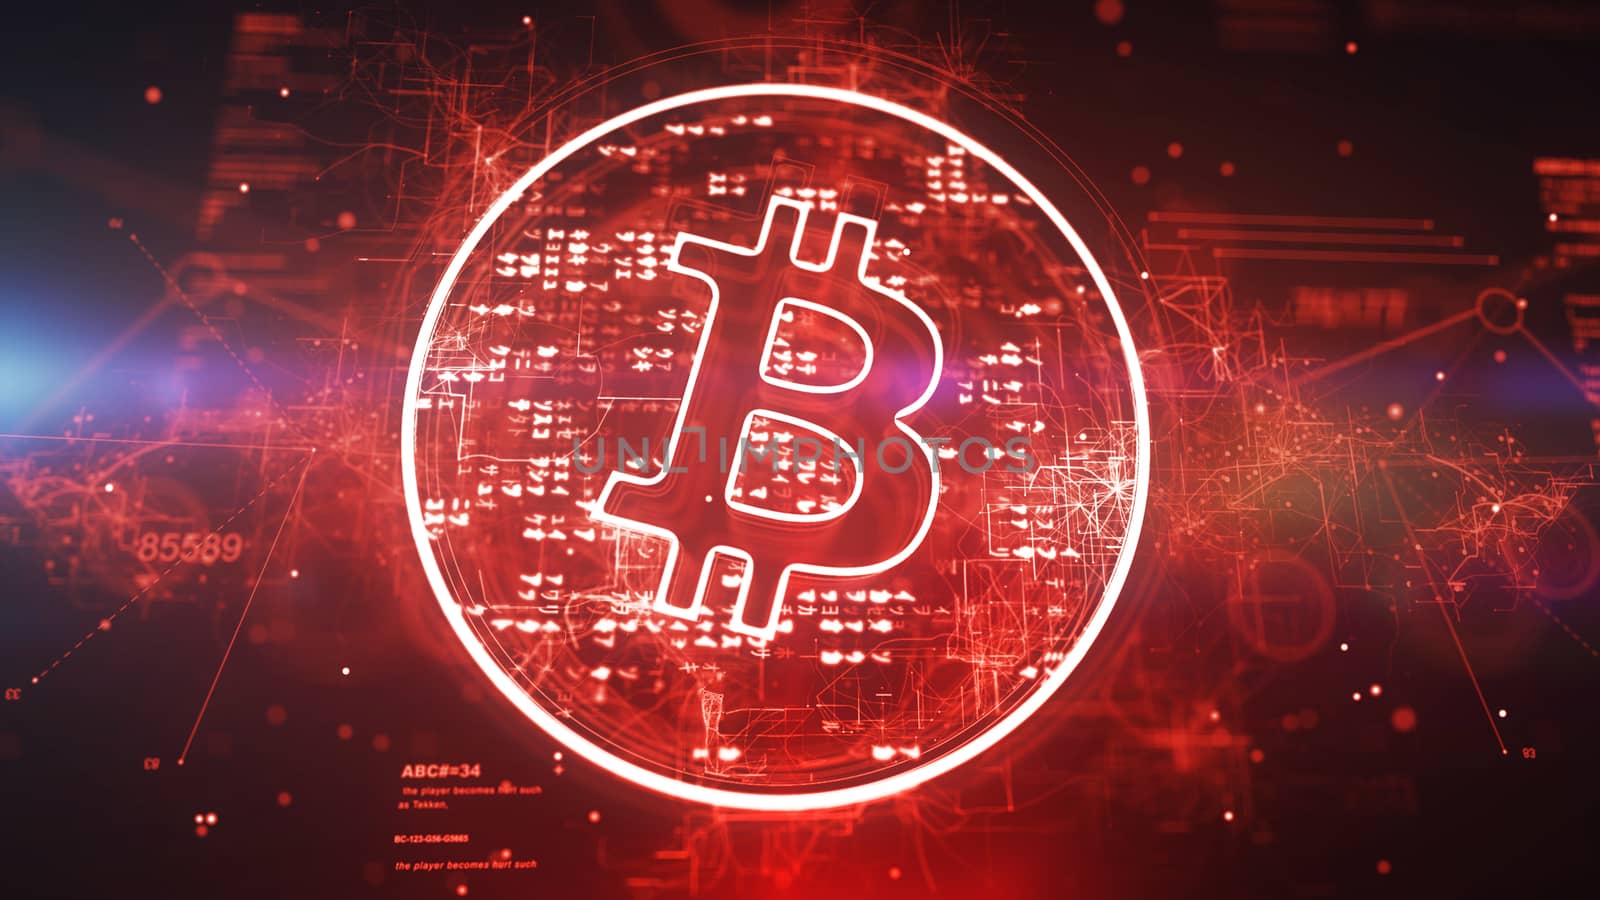 Amazing Bitcoin in Red Background by klss